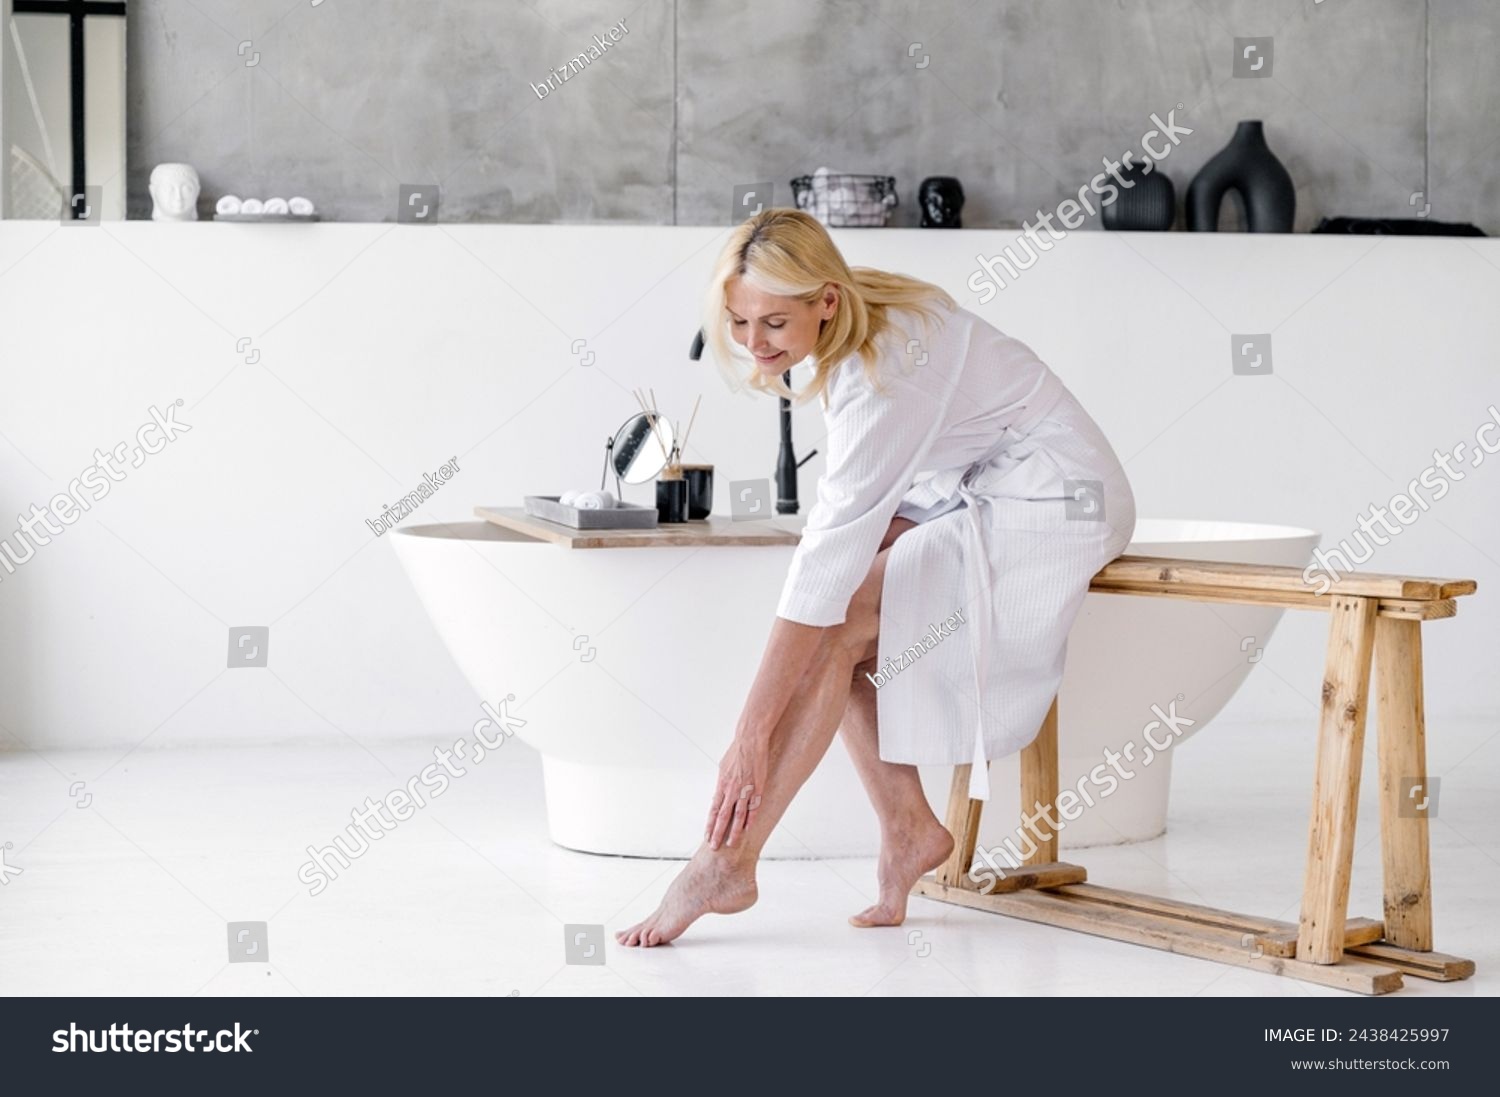 Mid age mature woman applying varicose prevention treatment cream massaging her barefoot legs sitting on bathtub wearing white bathrobe. Concept of health care and bodycare after menopause #2438425997